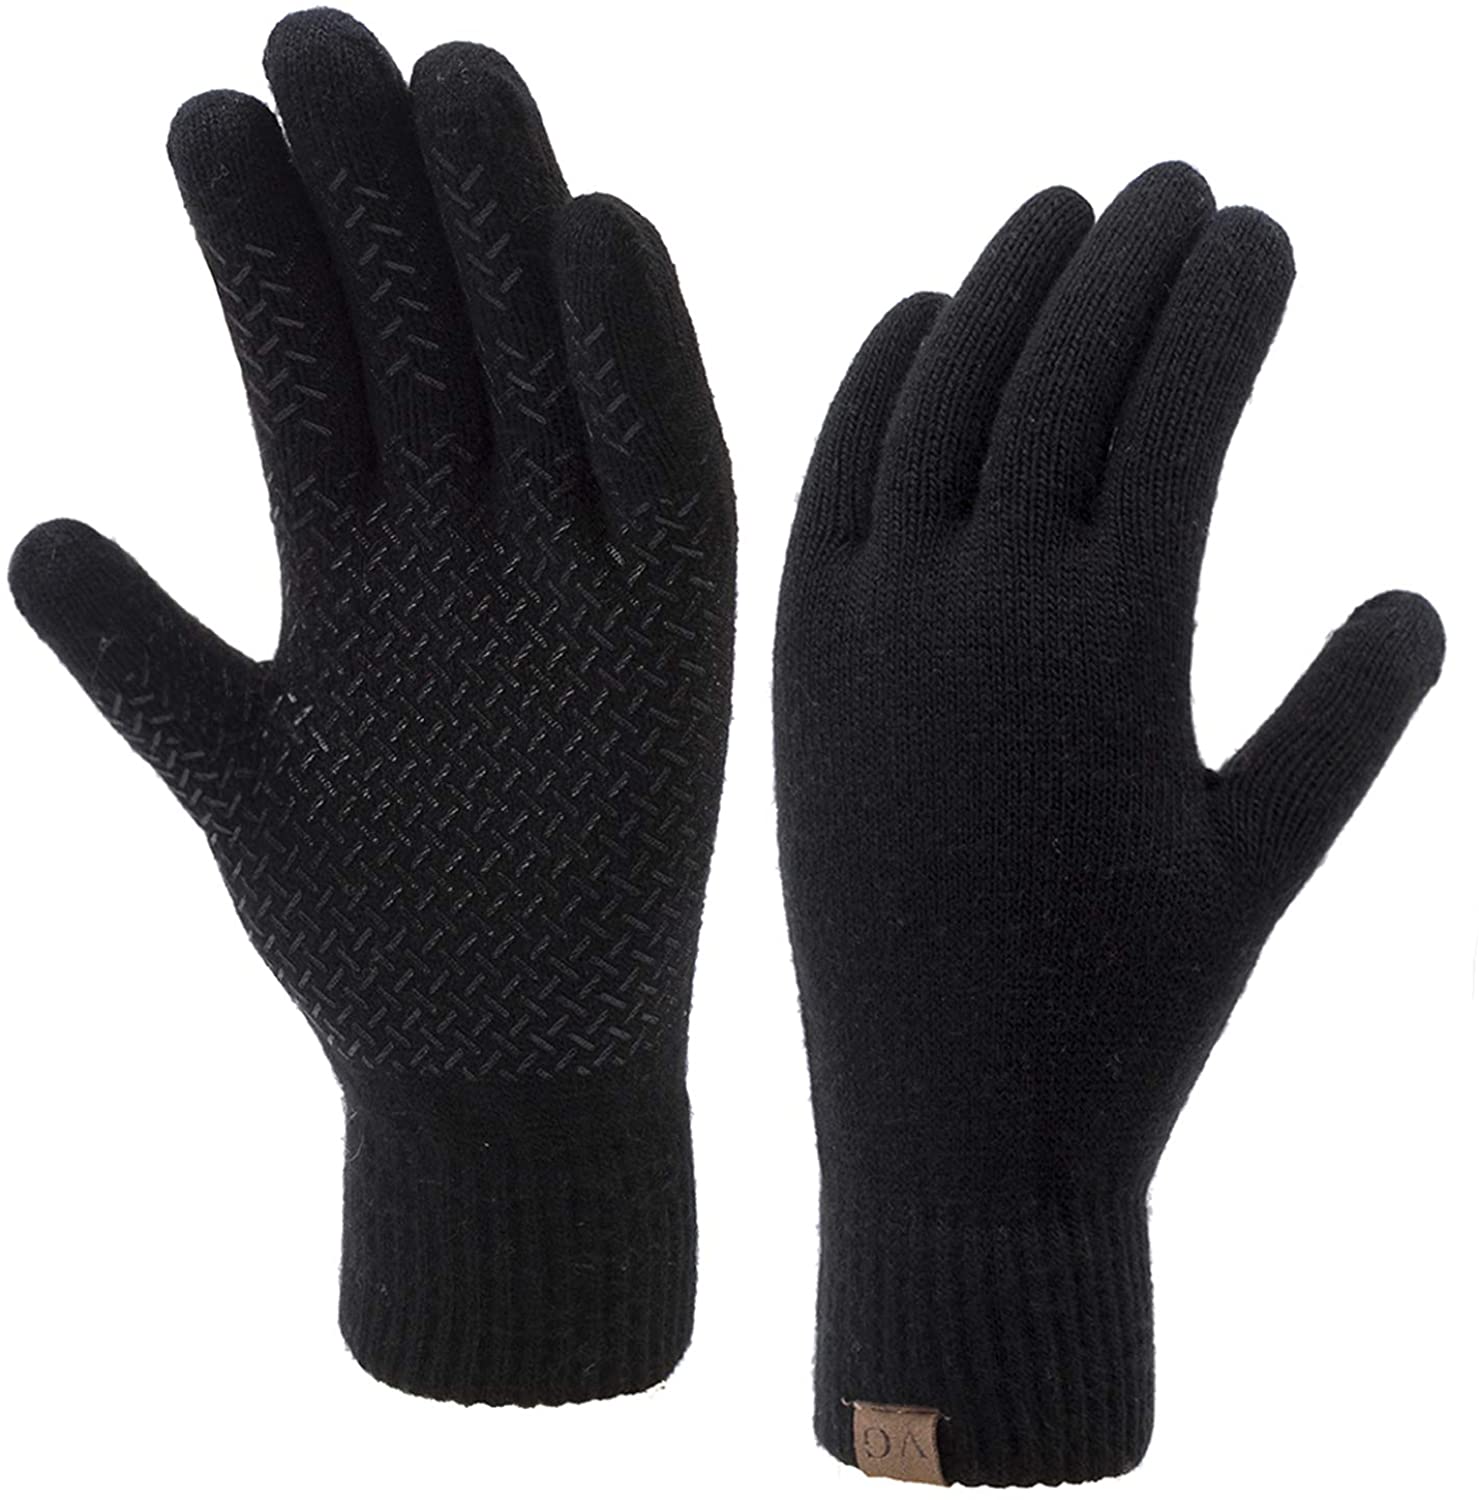 gloves for cold typing fingers